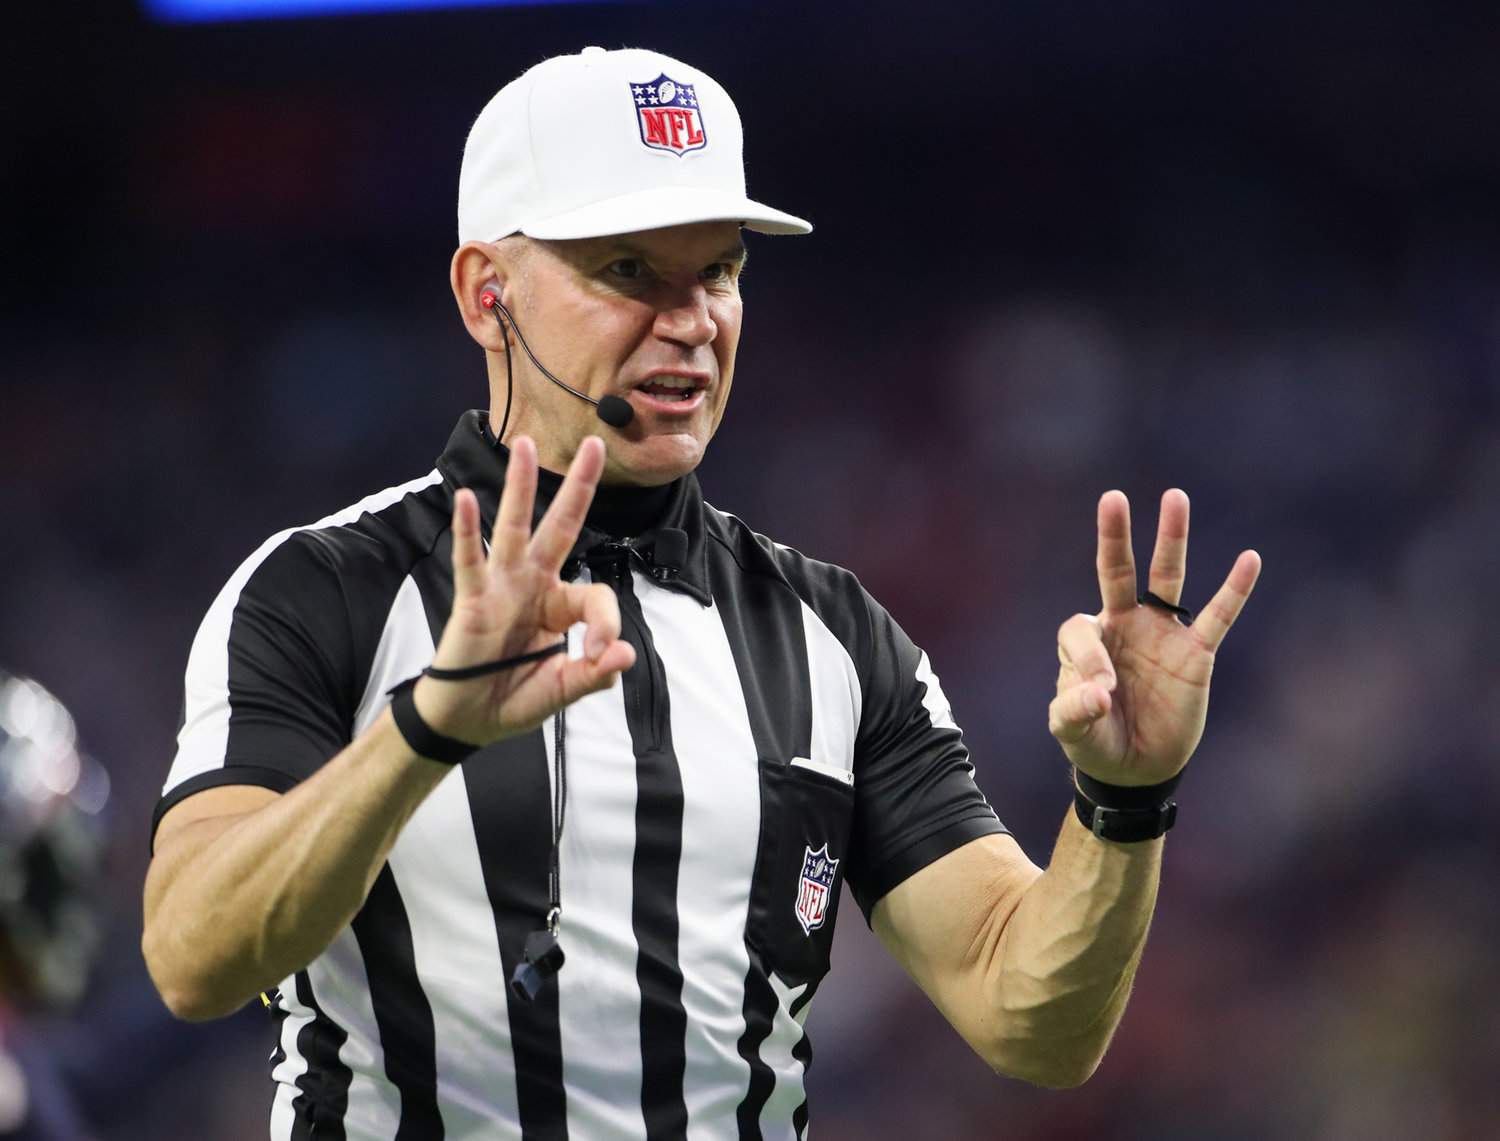 Referee Clete Blakeman (34) during an NFL game between the Houston Texans and the New York Jets on November 28, 2021 in Houston, Texas. The Jets won, 21-14